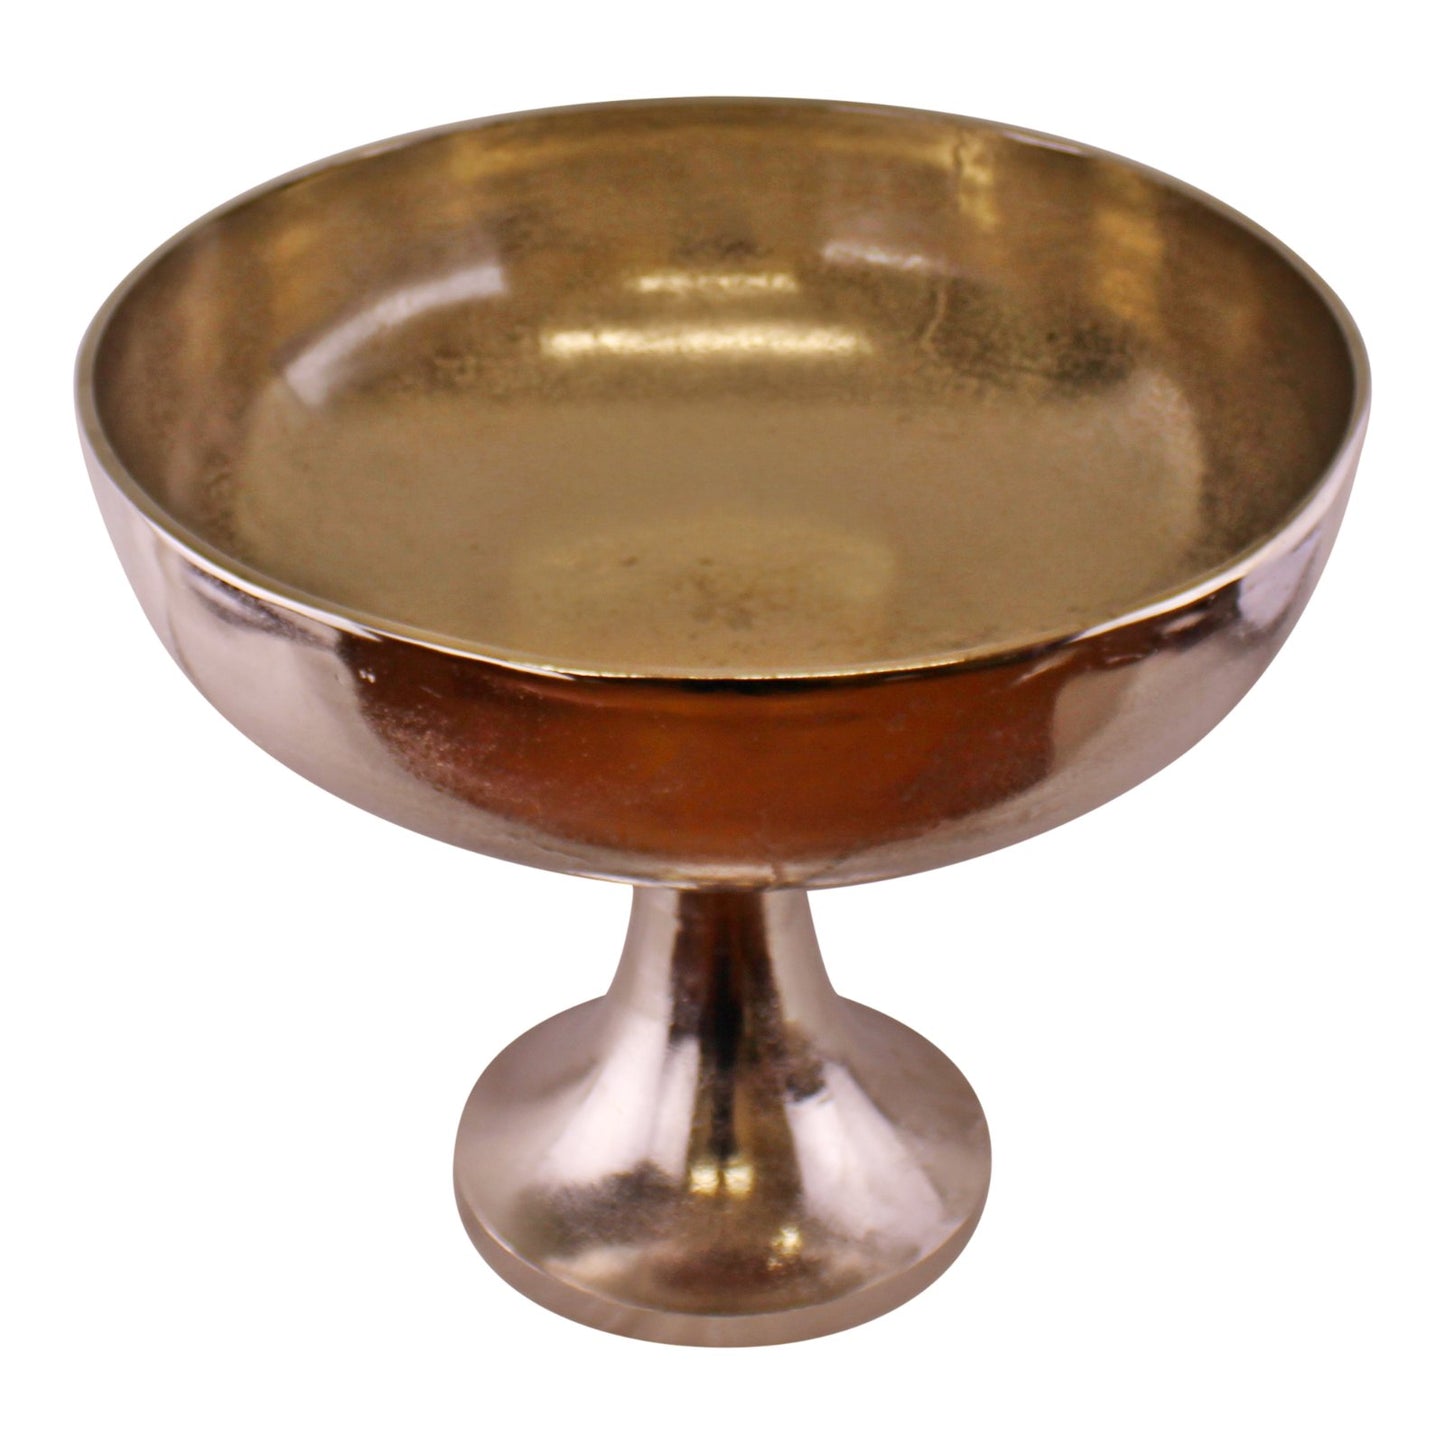 Silver Metal Bowl On Stand, 42x35cm